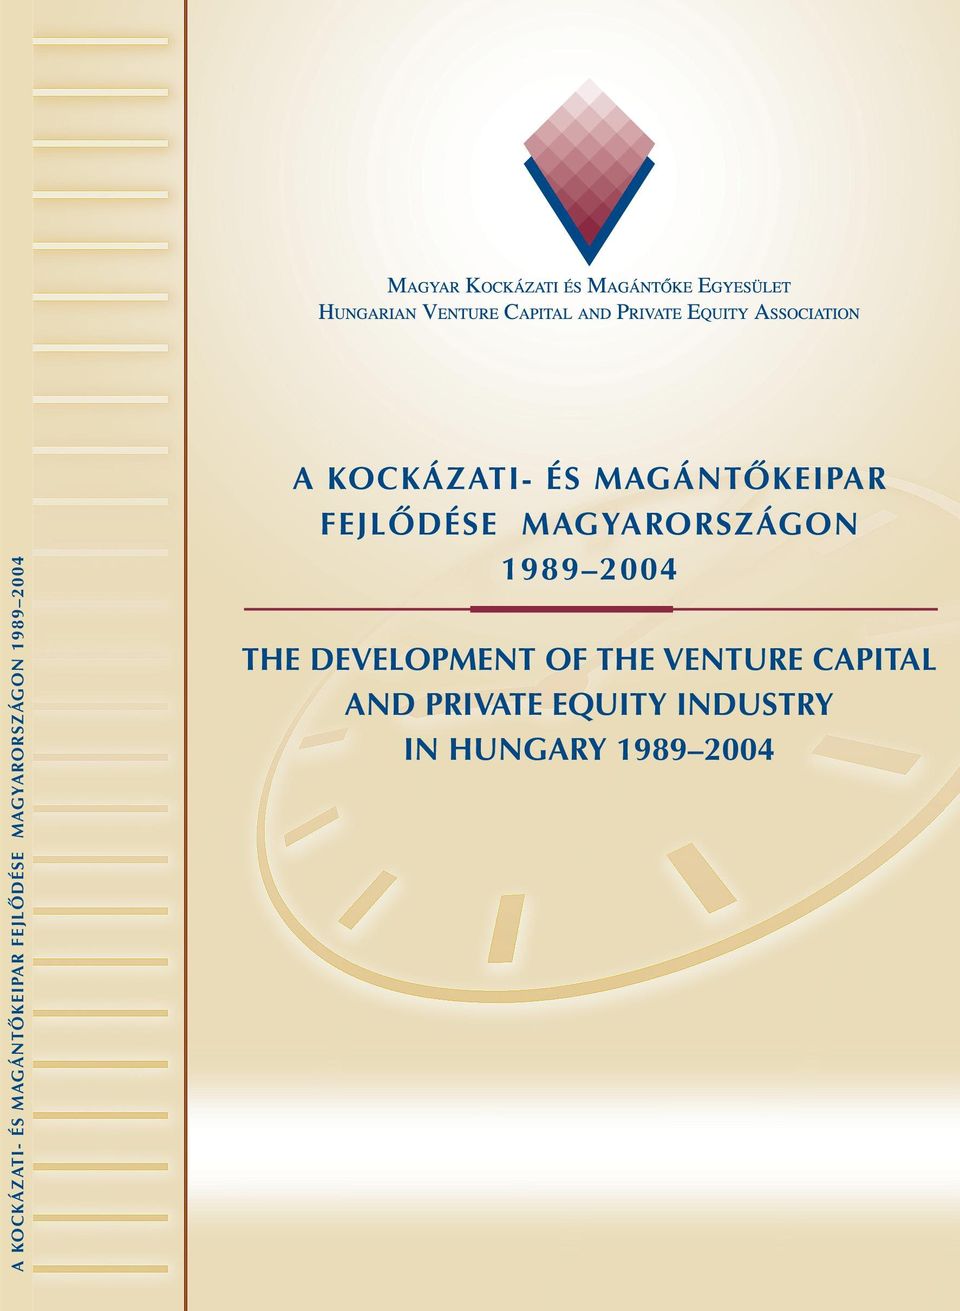 CAPITAL AND PRIVATE EQUITY INDUSTRY IN HUNGARY 1989